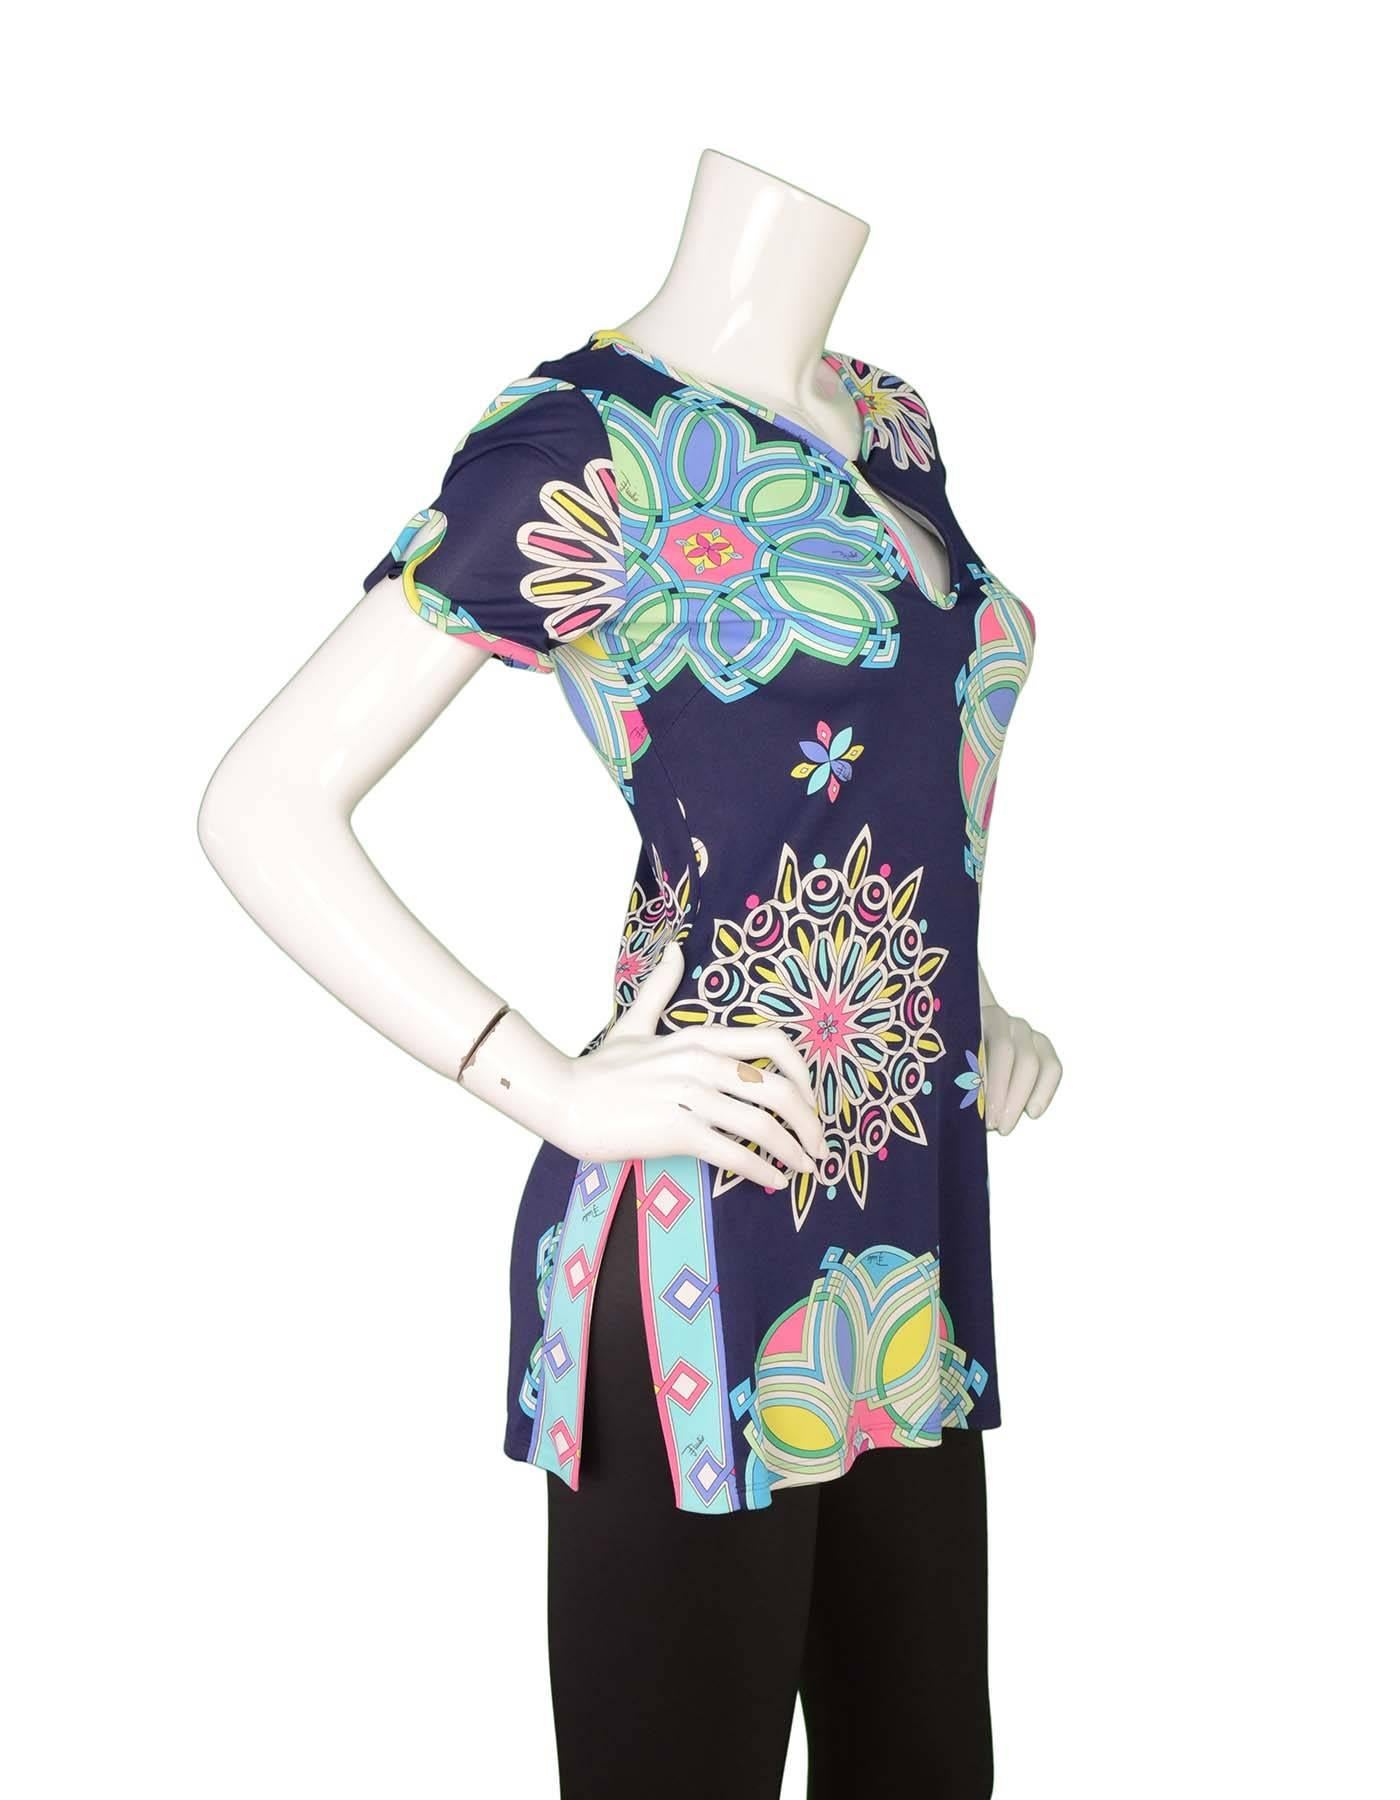 Emilio Pucci Navy Starburst Printed Tunic 
Features multi-colored starburst print throughout
Made In: Italy
Color: Navy, white, pink, teal, green
Composition: 100% viscose
Lining: None
Closure/Opening: Pull over
Exterior Pockets: